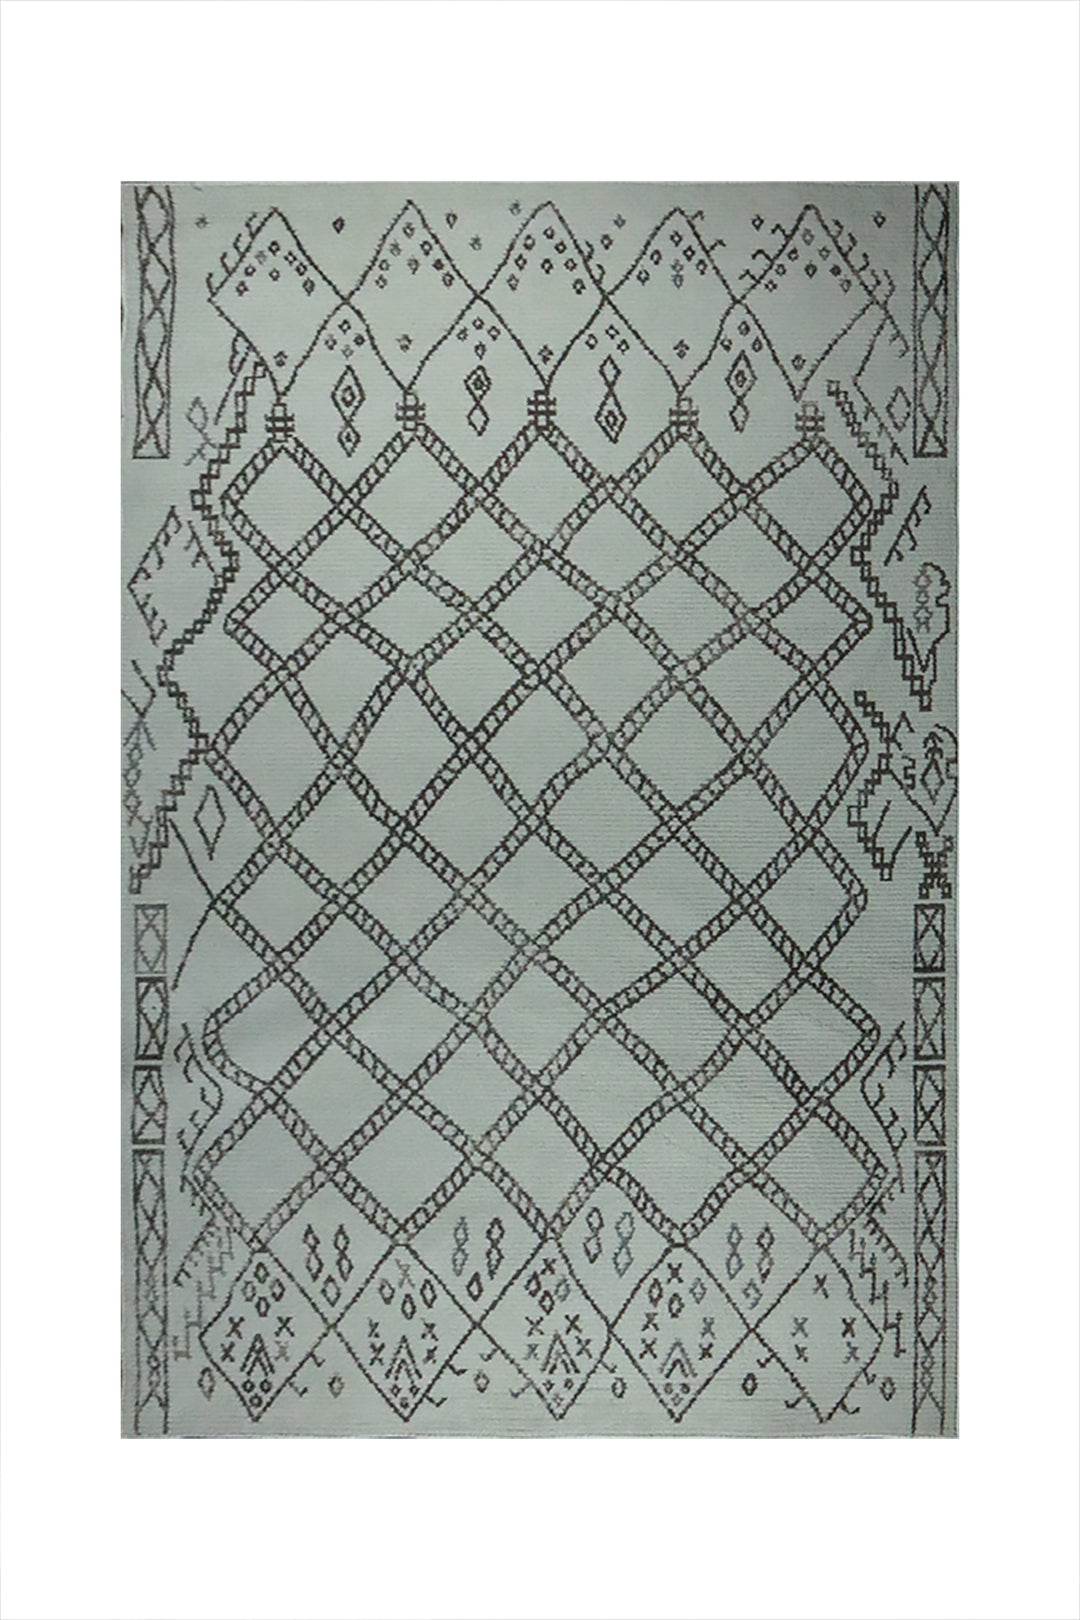 Turkish Modern Festival WD Rug - 5.2 x 7.5 FT - White and Gray - Sleek and Minimalist for Chic Interiors